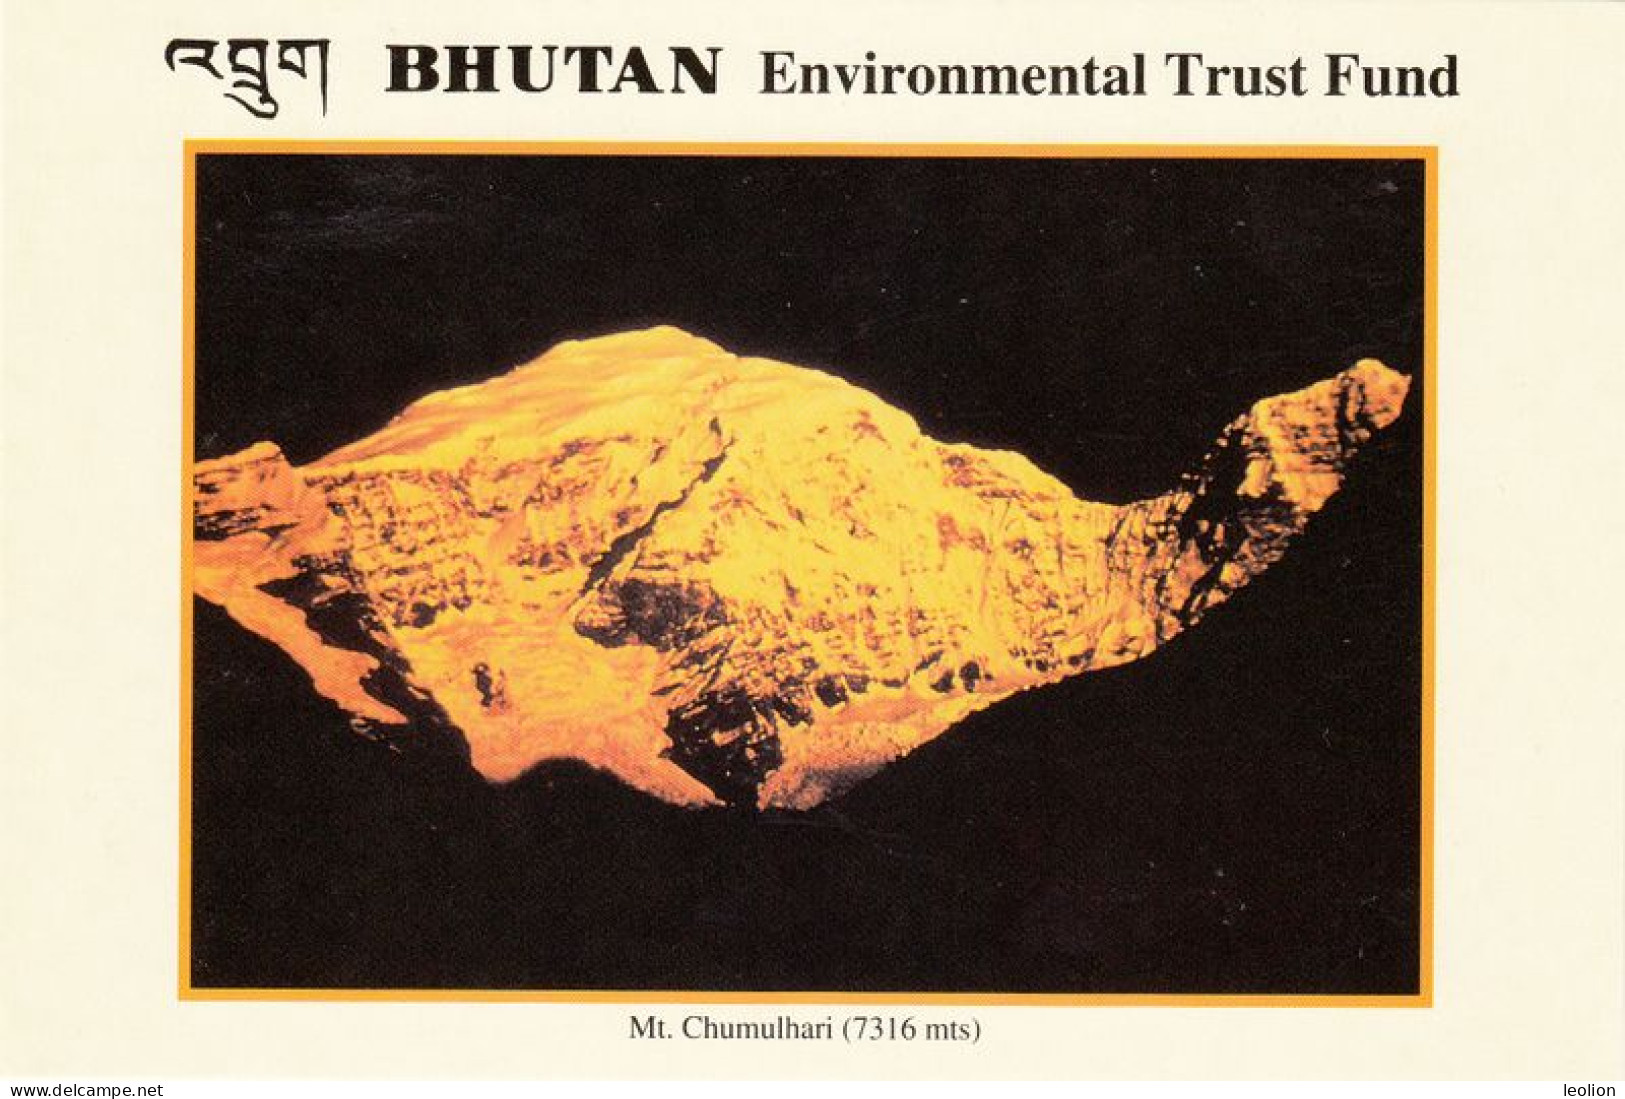 BHUTAN Post 1993 set of 17 Environmental Trust Fund Postcards, unused in cover Bhoutan Fauna Flora P&T issue